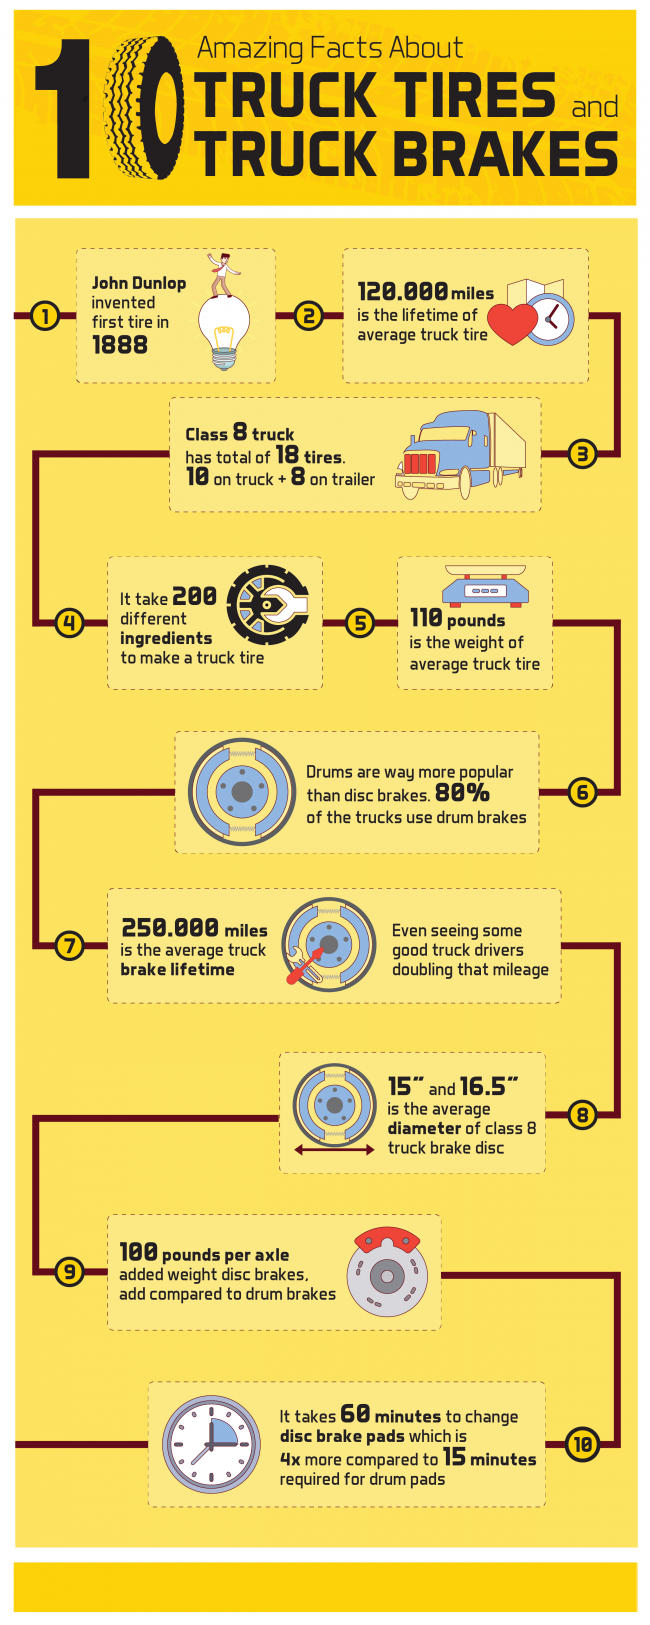 INFOGRAPHIC: 10 Amazing Facts About Truck Tires and Truck Brakes